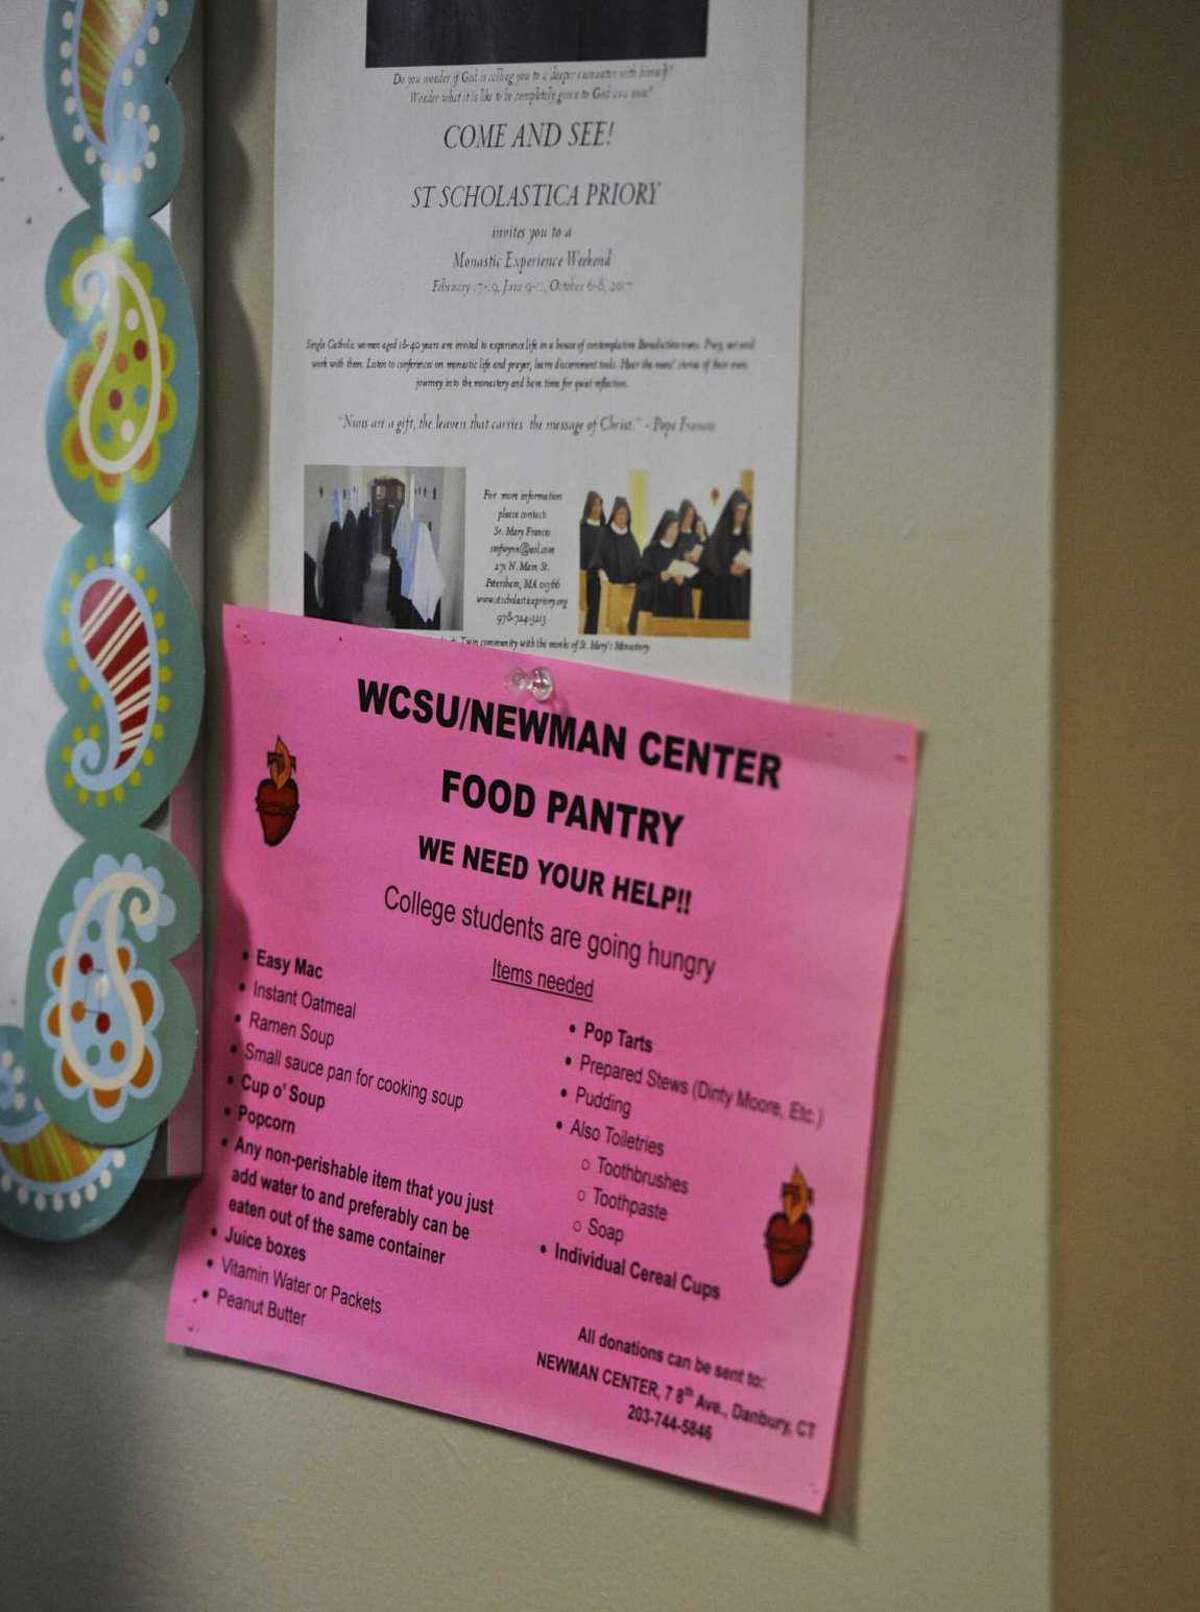 File photo. A sign for the Newman Center Food Pantry at Western Connecticut State University, asking for donations in Danbury, Conn.